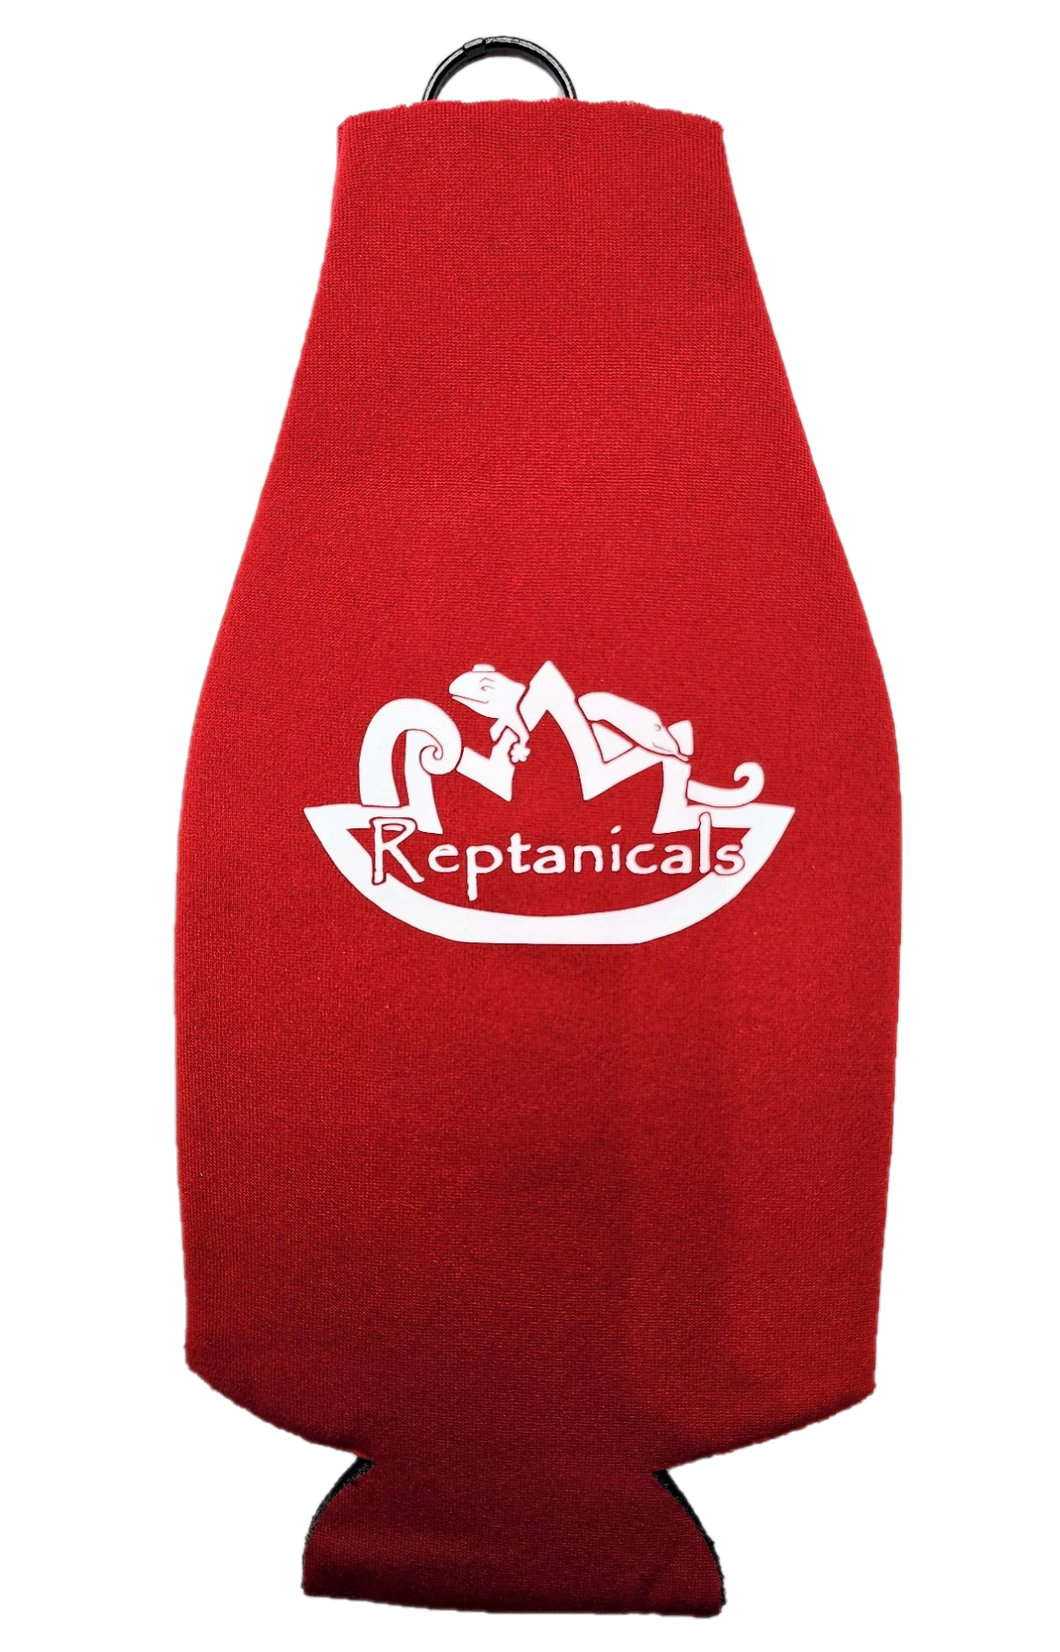 Reptanicals Red Coozie